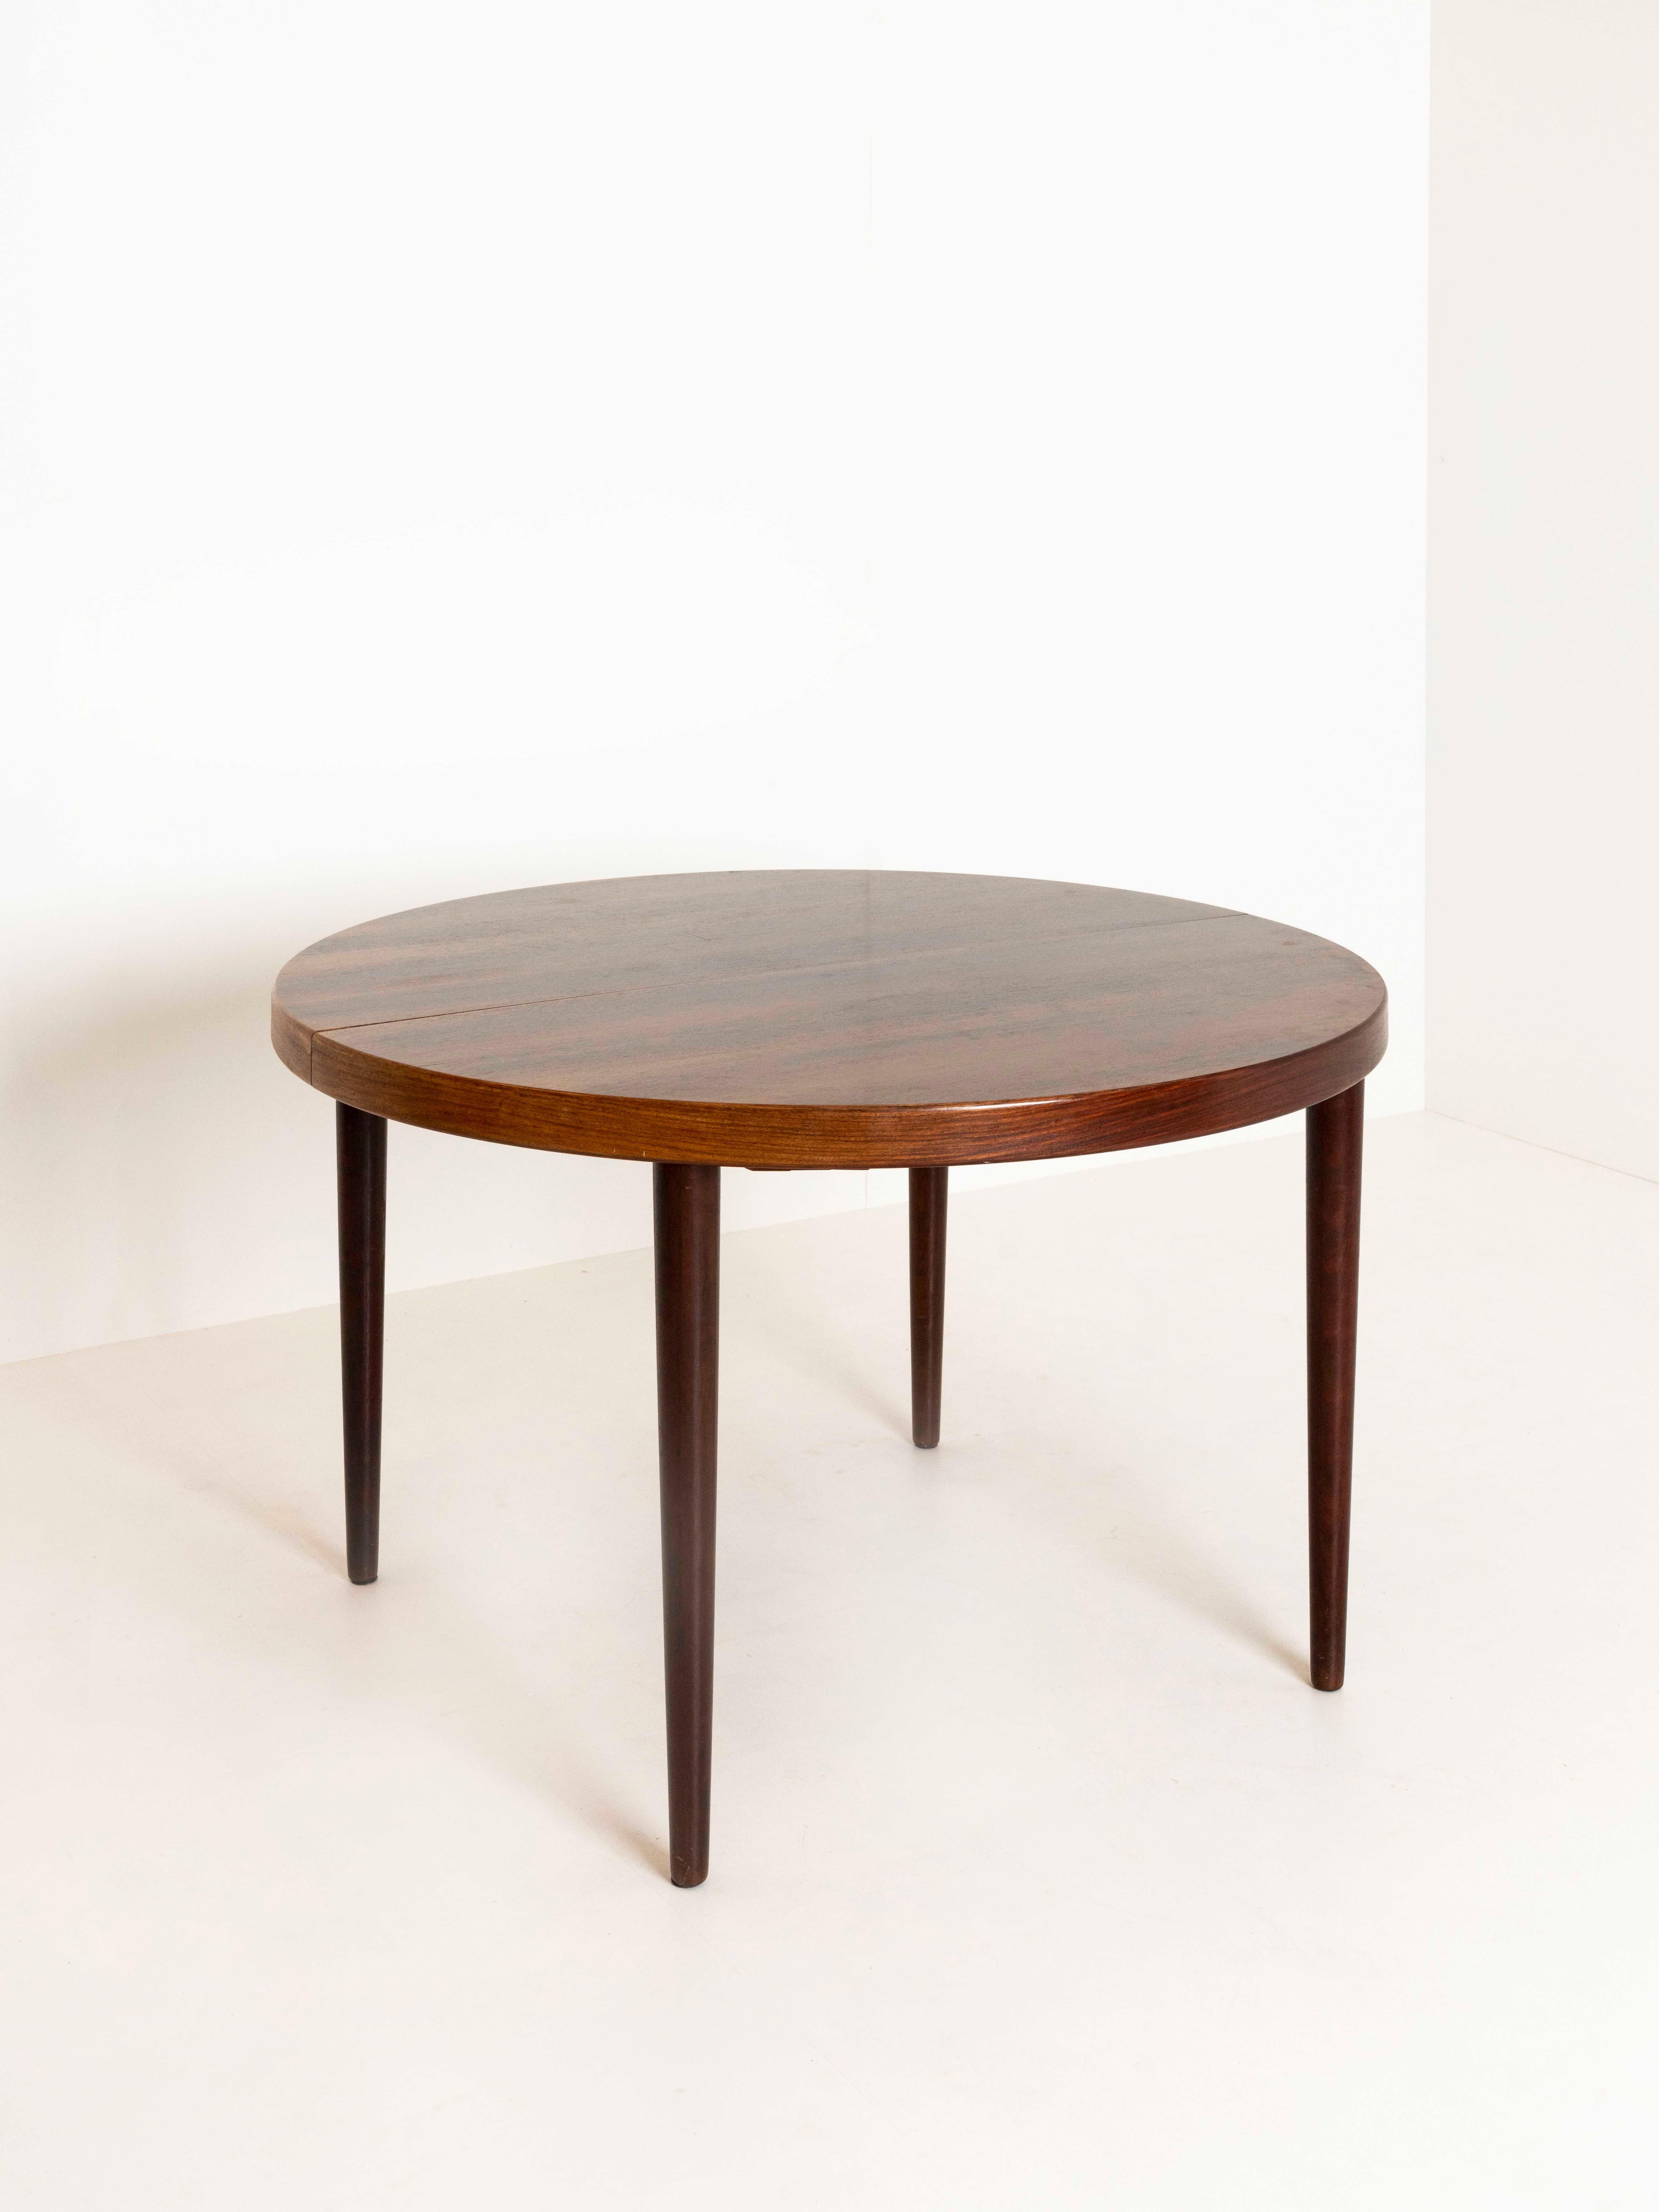 Nice extendable round dining table by Kai Kristiansen from Denmark ca the 1960s. This table has an elegant and sleek design. It has two extension pieces of which one in the exact same style as the table. This table can be in total extended to 225 cm